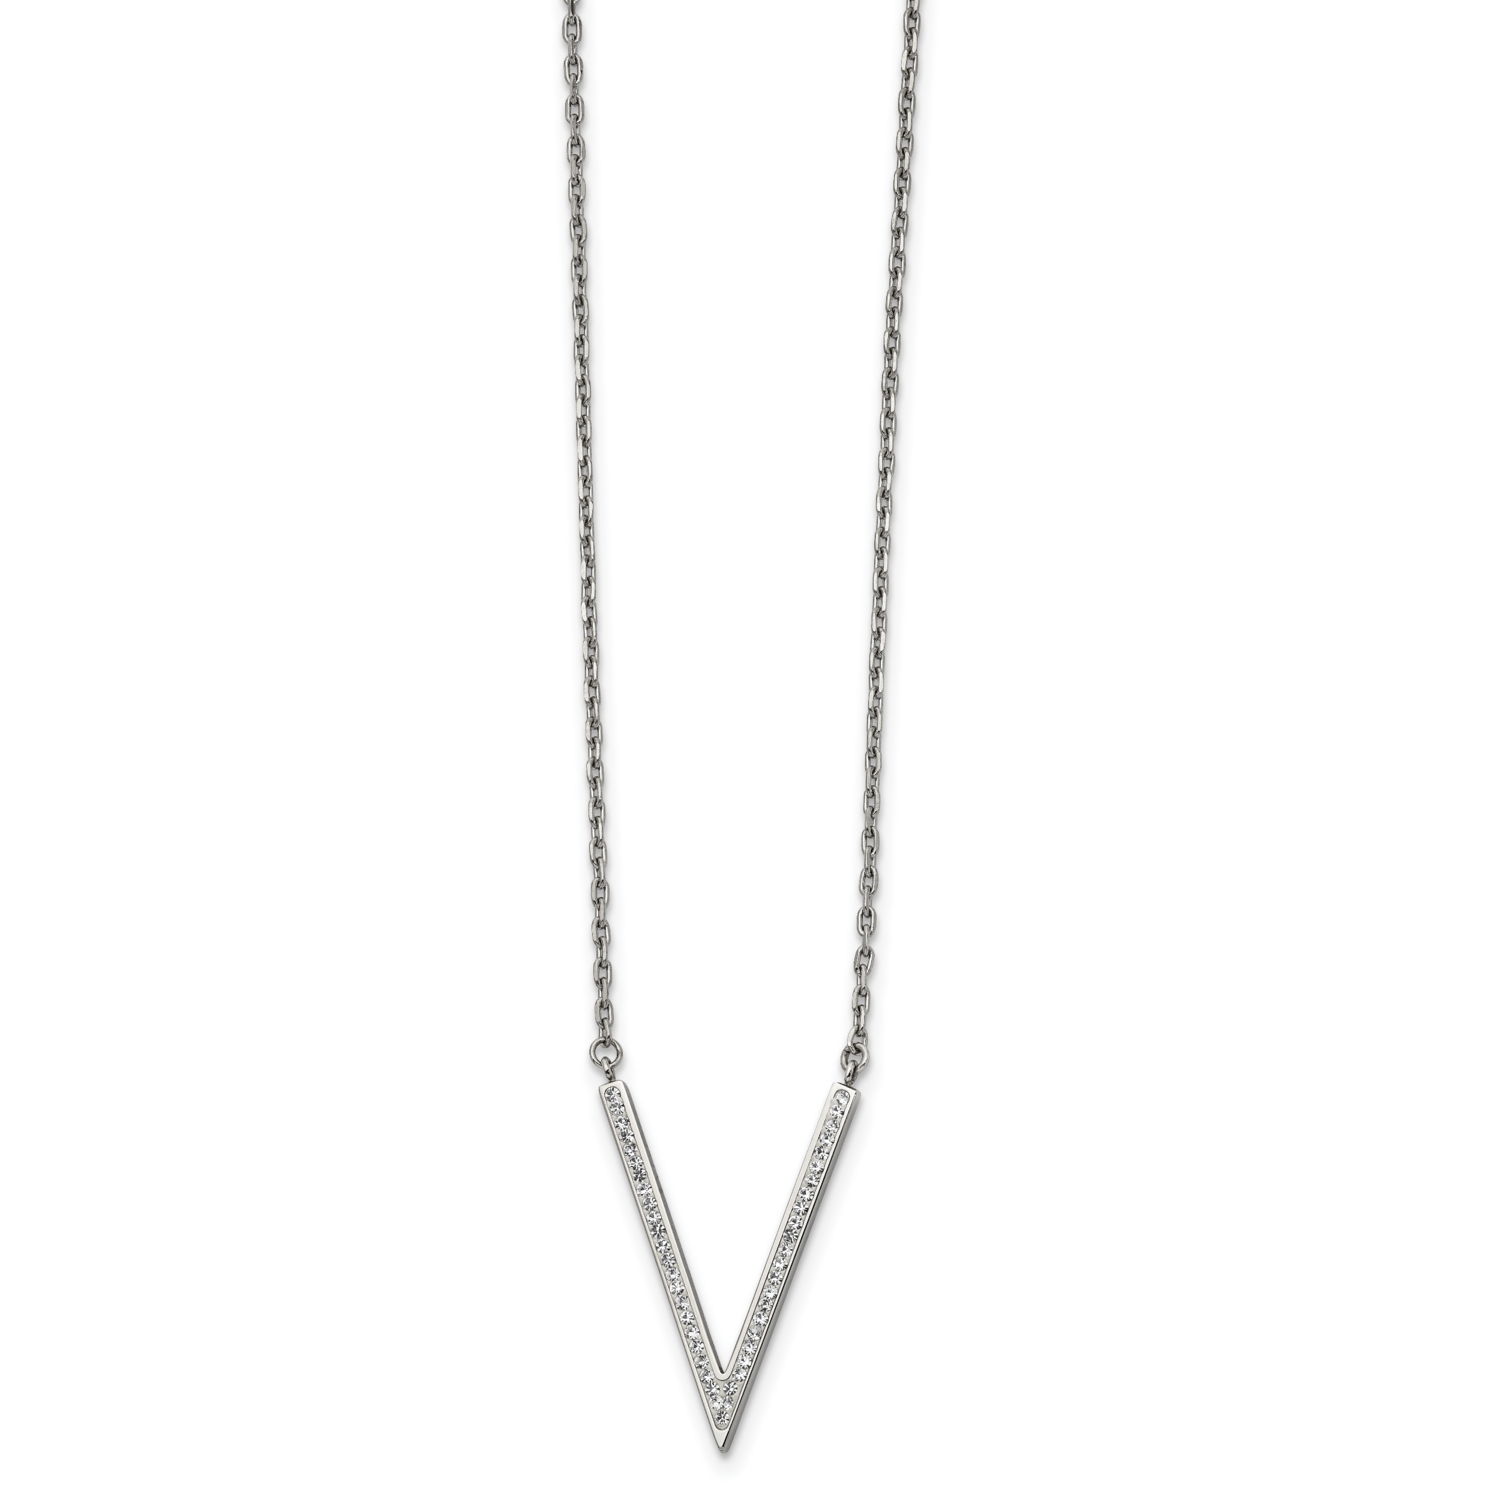 Preciosa Crystal 1.25 Inch . Extension V-shape Necklace Stainless Steel Polished SRN2555-16.5